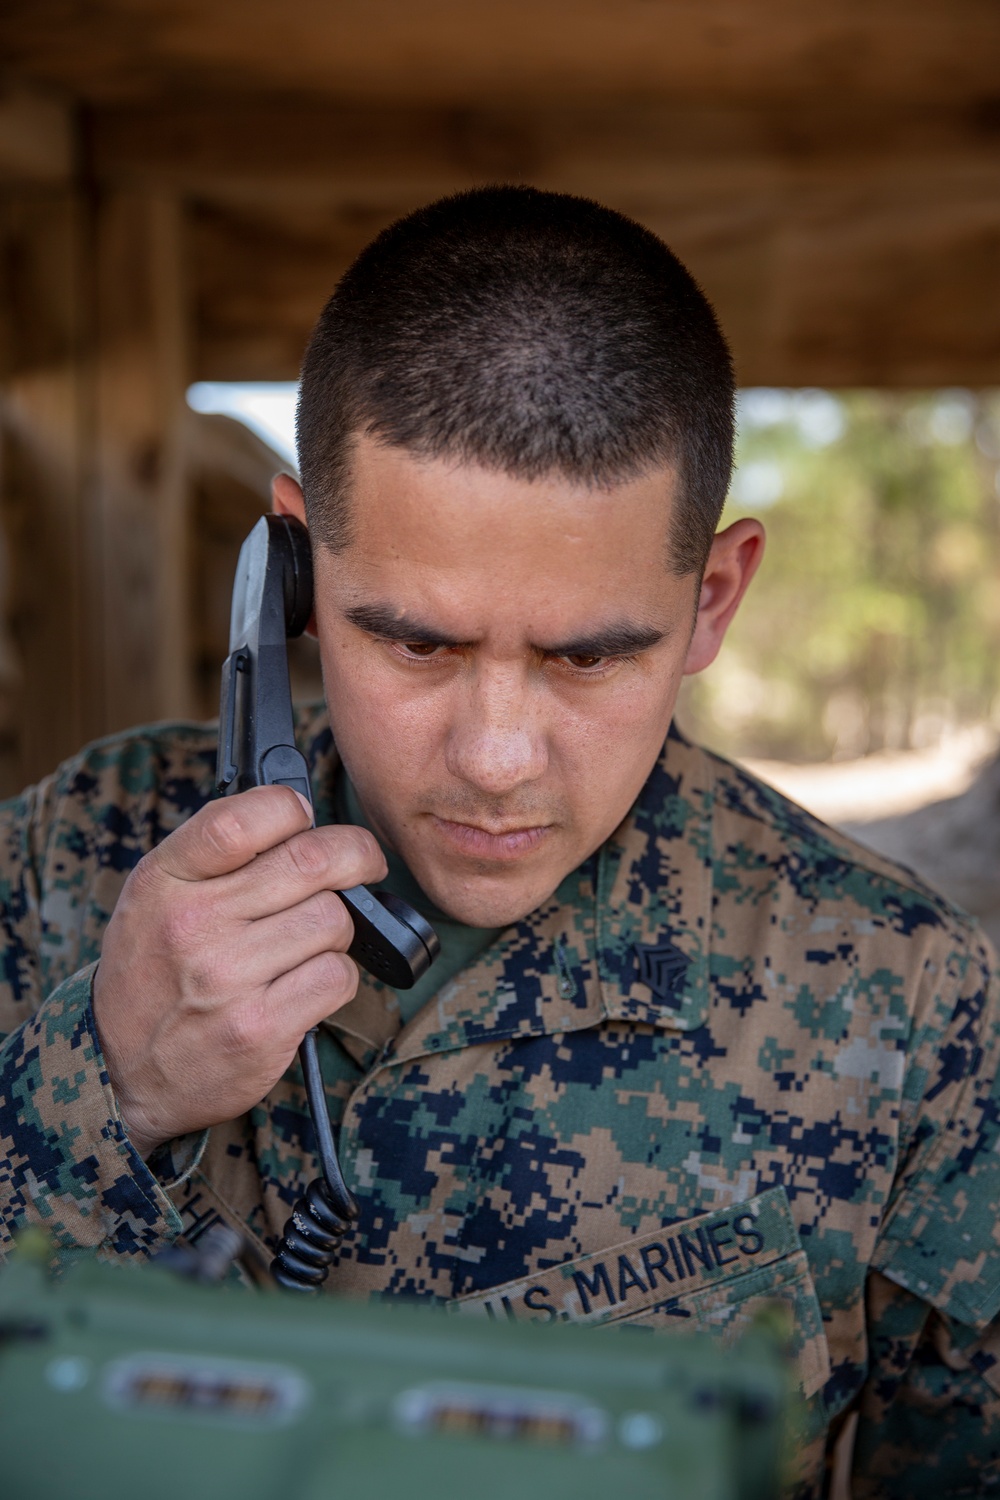 Marine task force deploying to Central America prepare for missions around Latin America